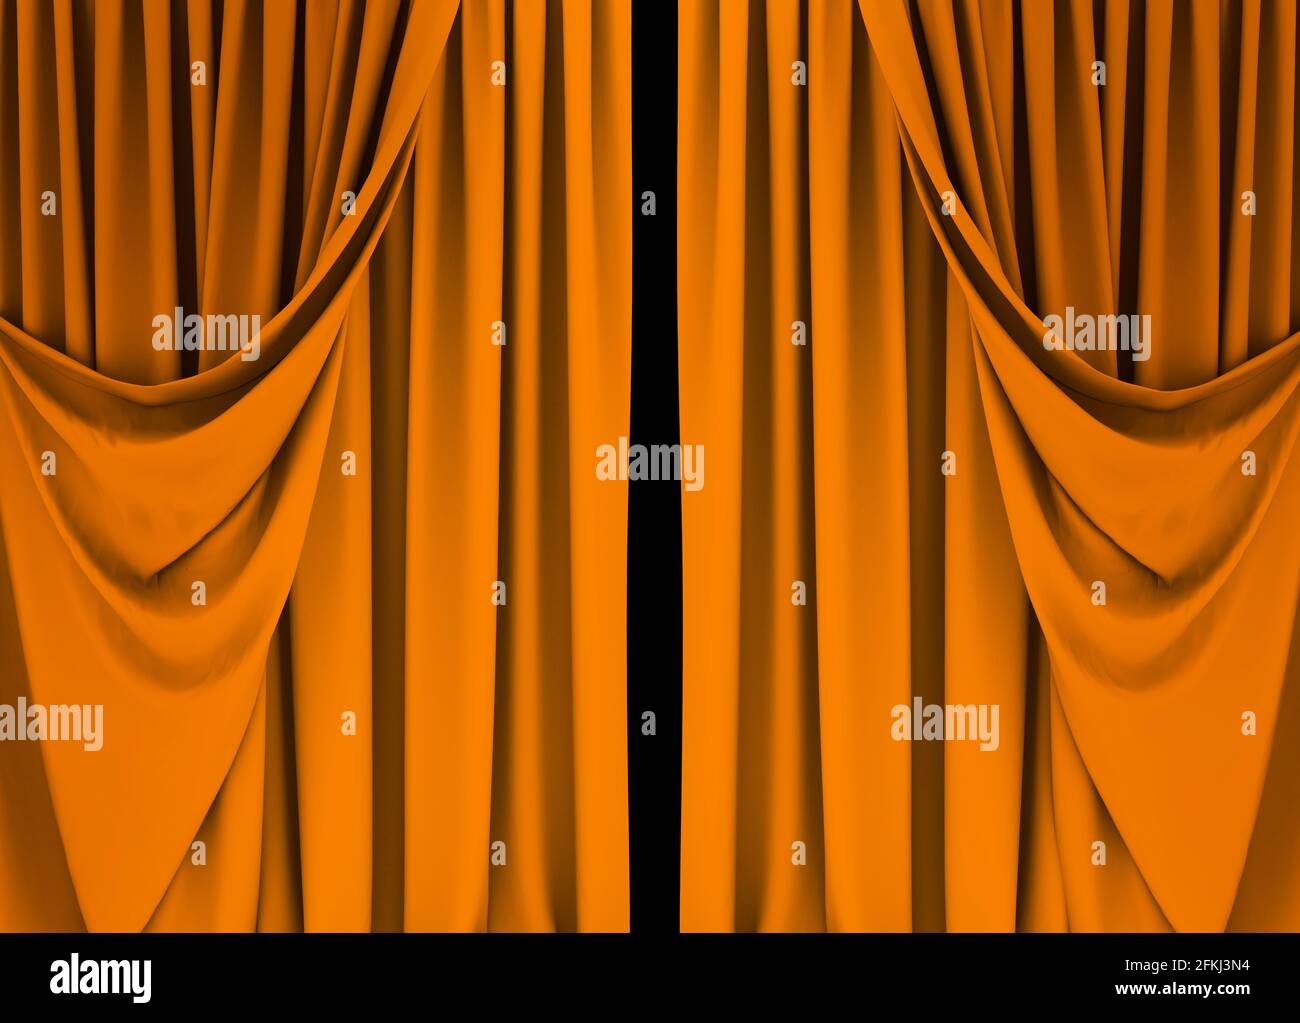 Yellow curtain, red curtain background, theater Stock Photo